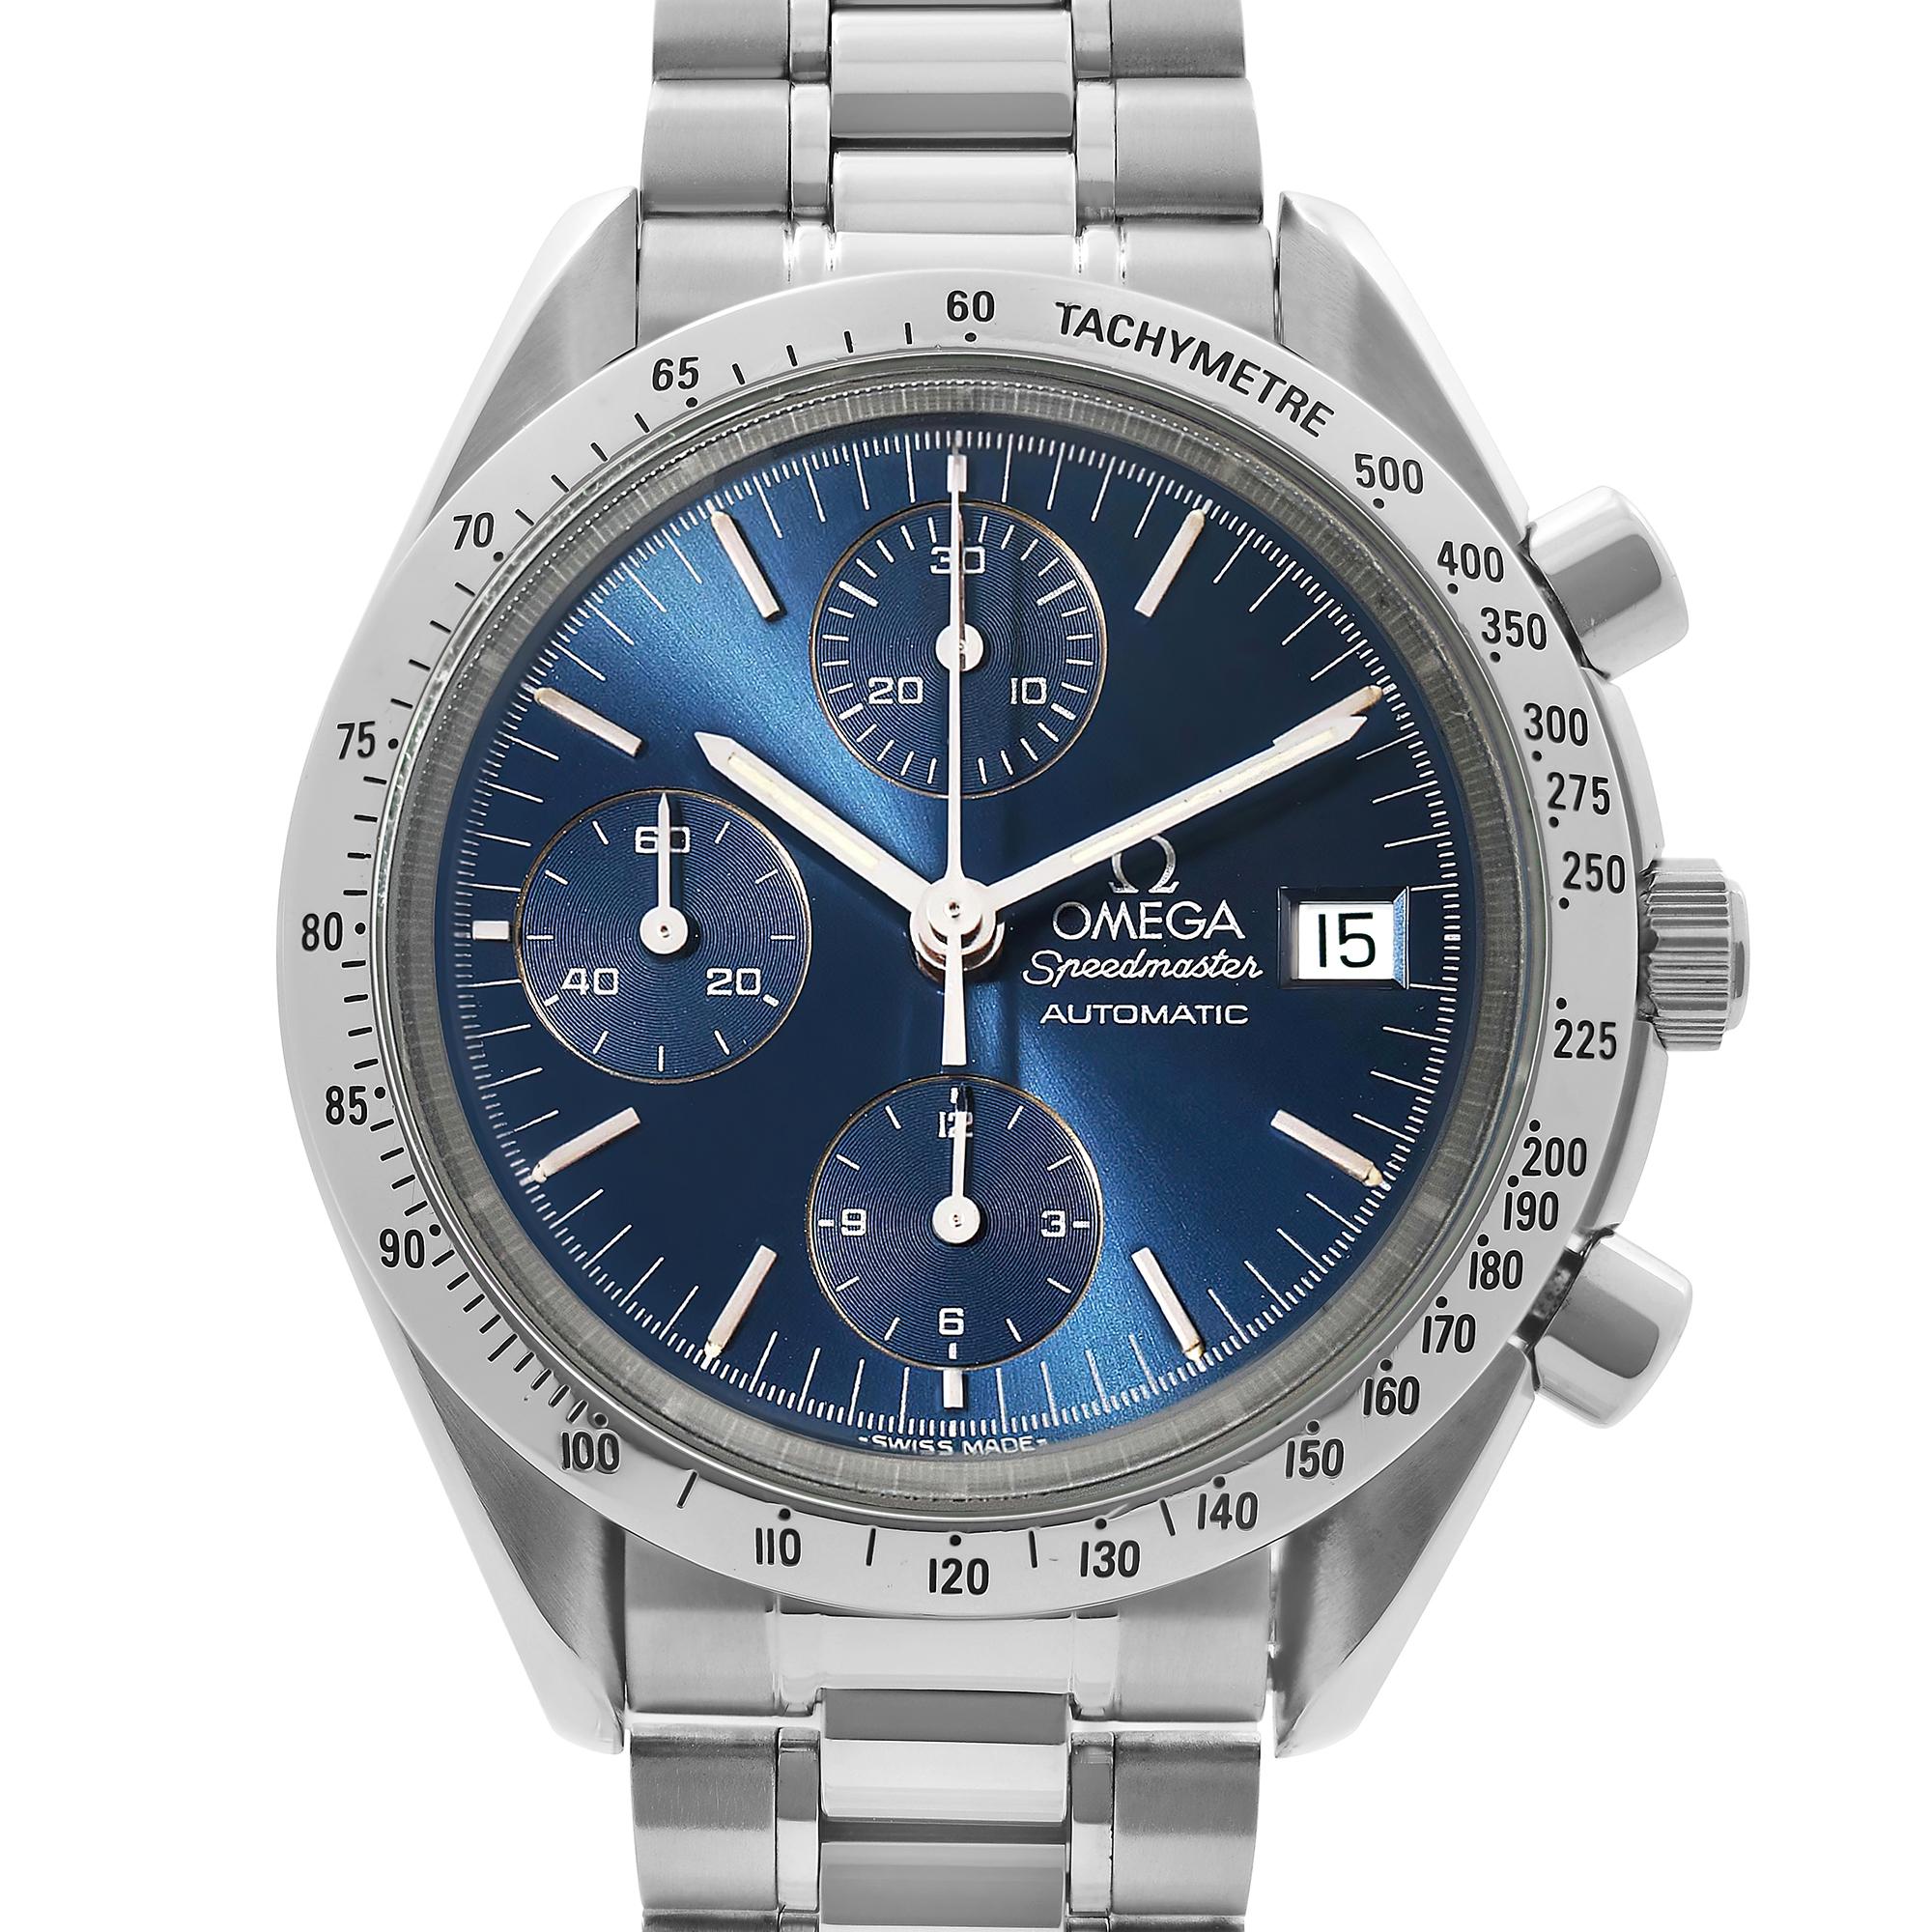 Pre-owned Omega Speedmaster Stainless Steel Blue Dial Automatic Men's Watch. Minor patina on hour markers and on handsThe Watch Bezel Shows Minor Dents between  225-200 Number. No Original Box and Papers are Included. Comes with Chronostore